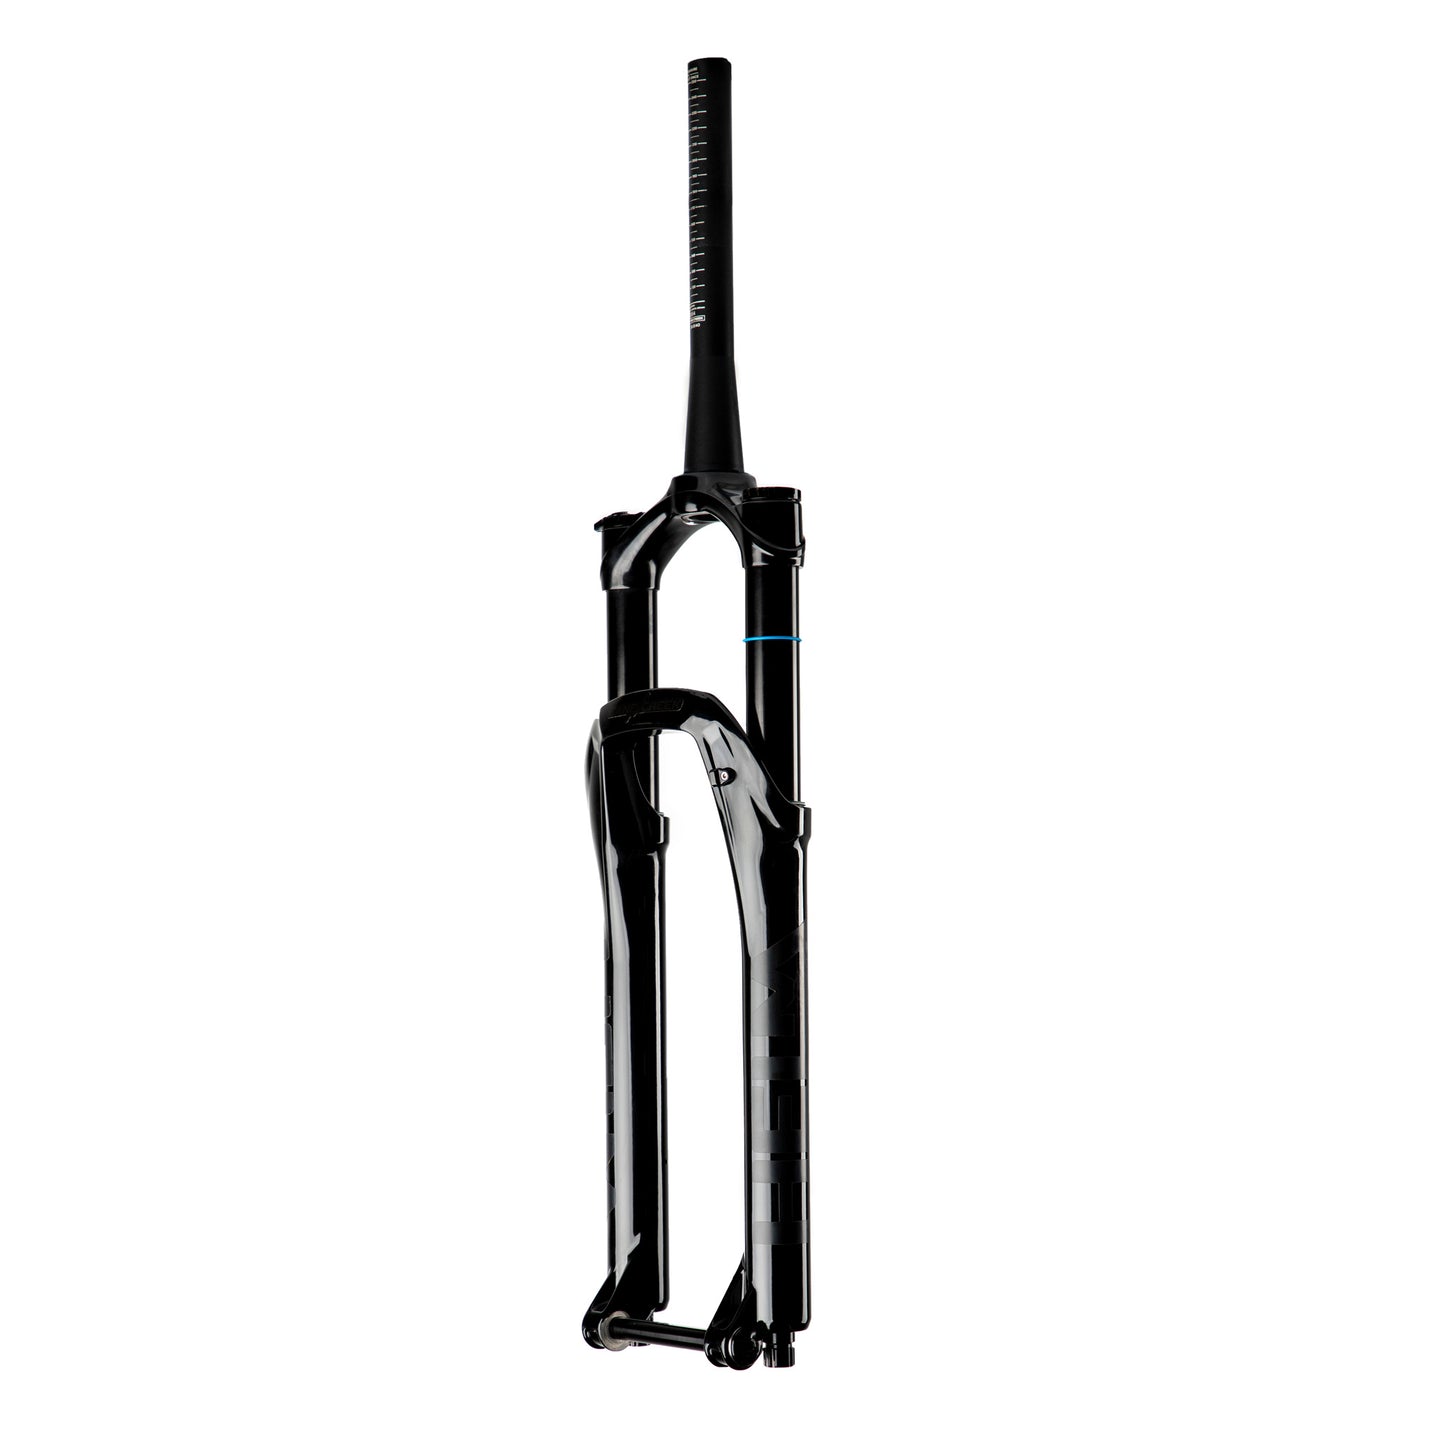 Cane Creek Helm MKII Air 29 Suspension Fork - 29" 150 mm 15 x 110 mm 44 mm Offset Gloss BLK